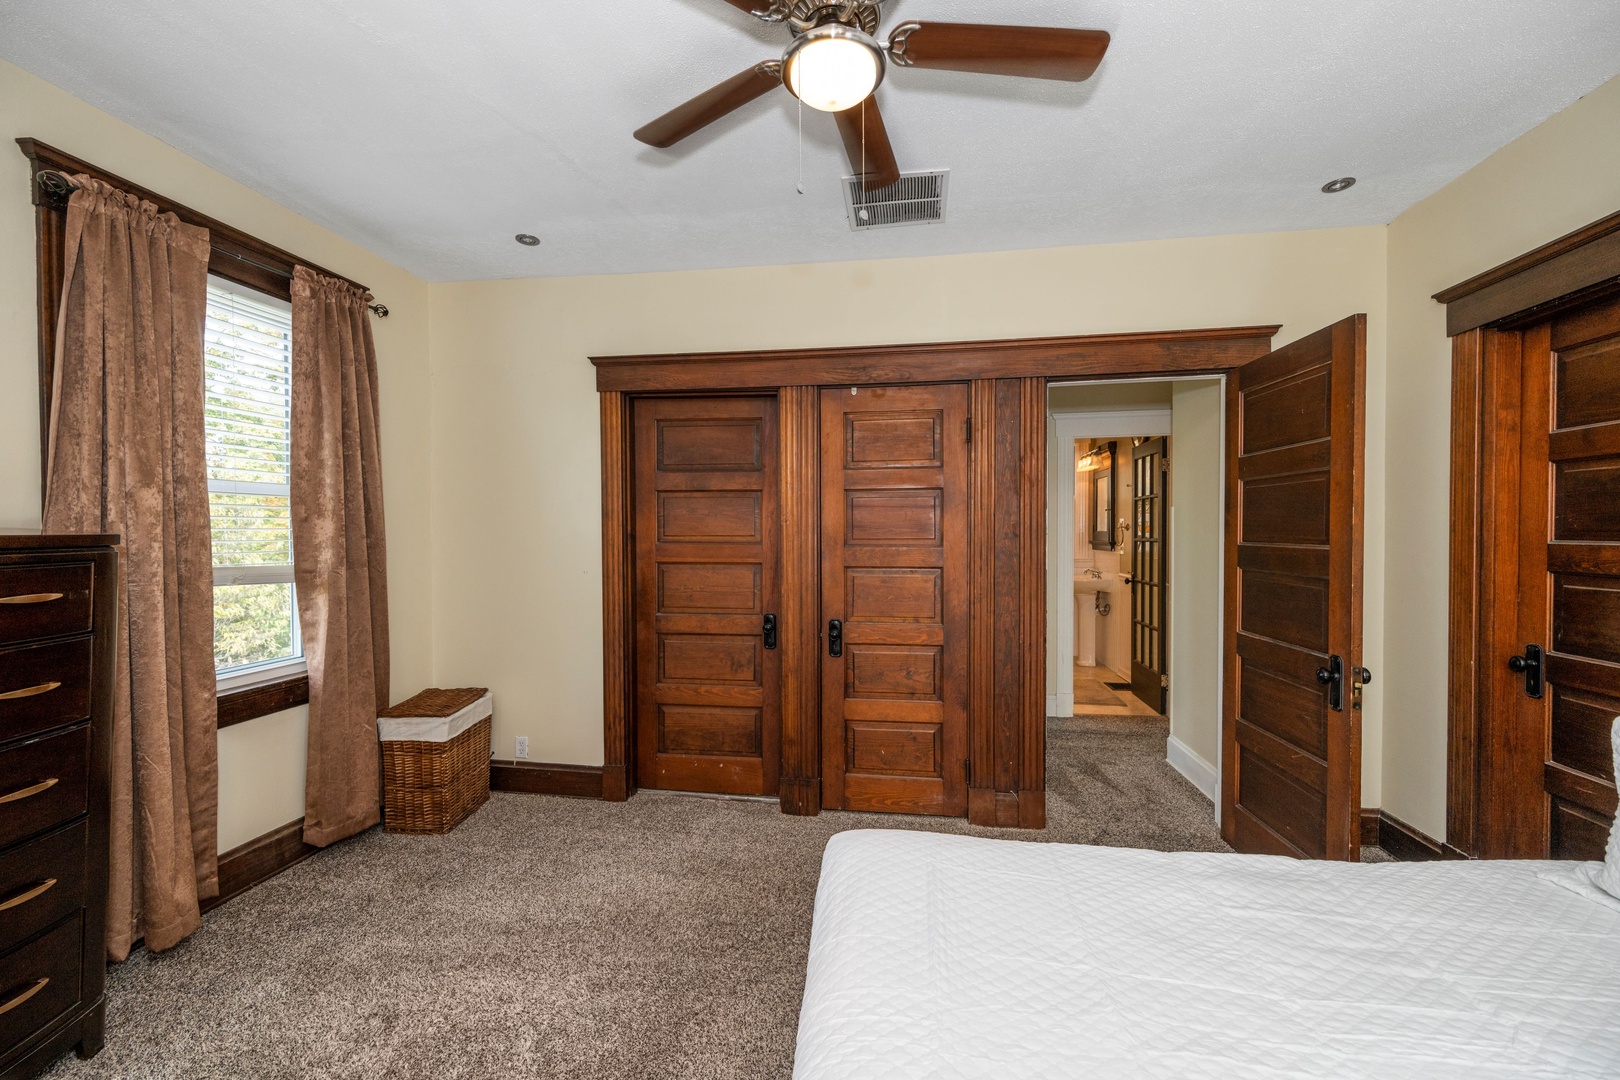 The 2nd of 2 queen bedrooms on the second level, with a dresser & ceiling fan